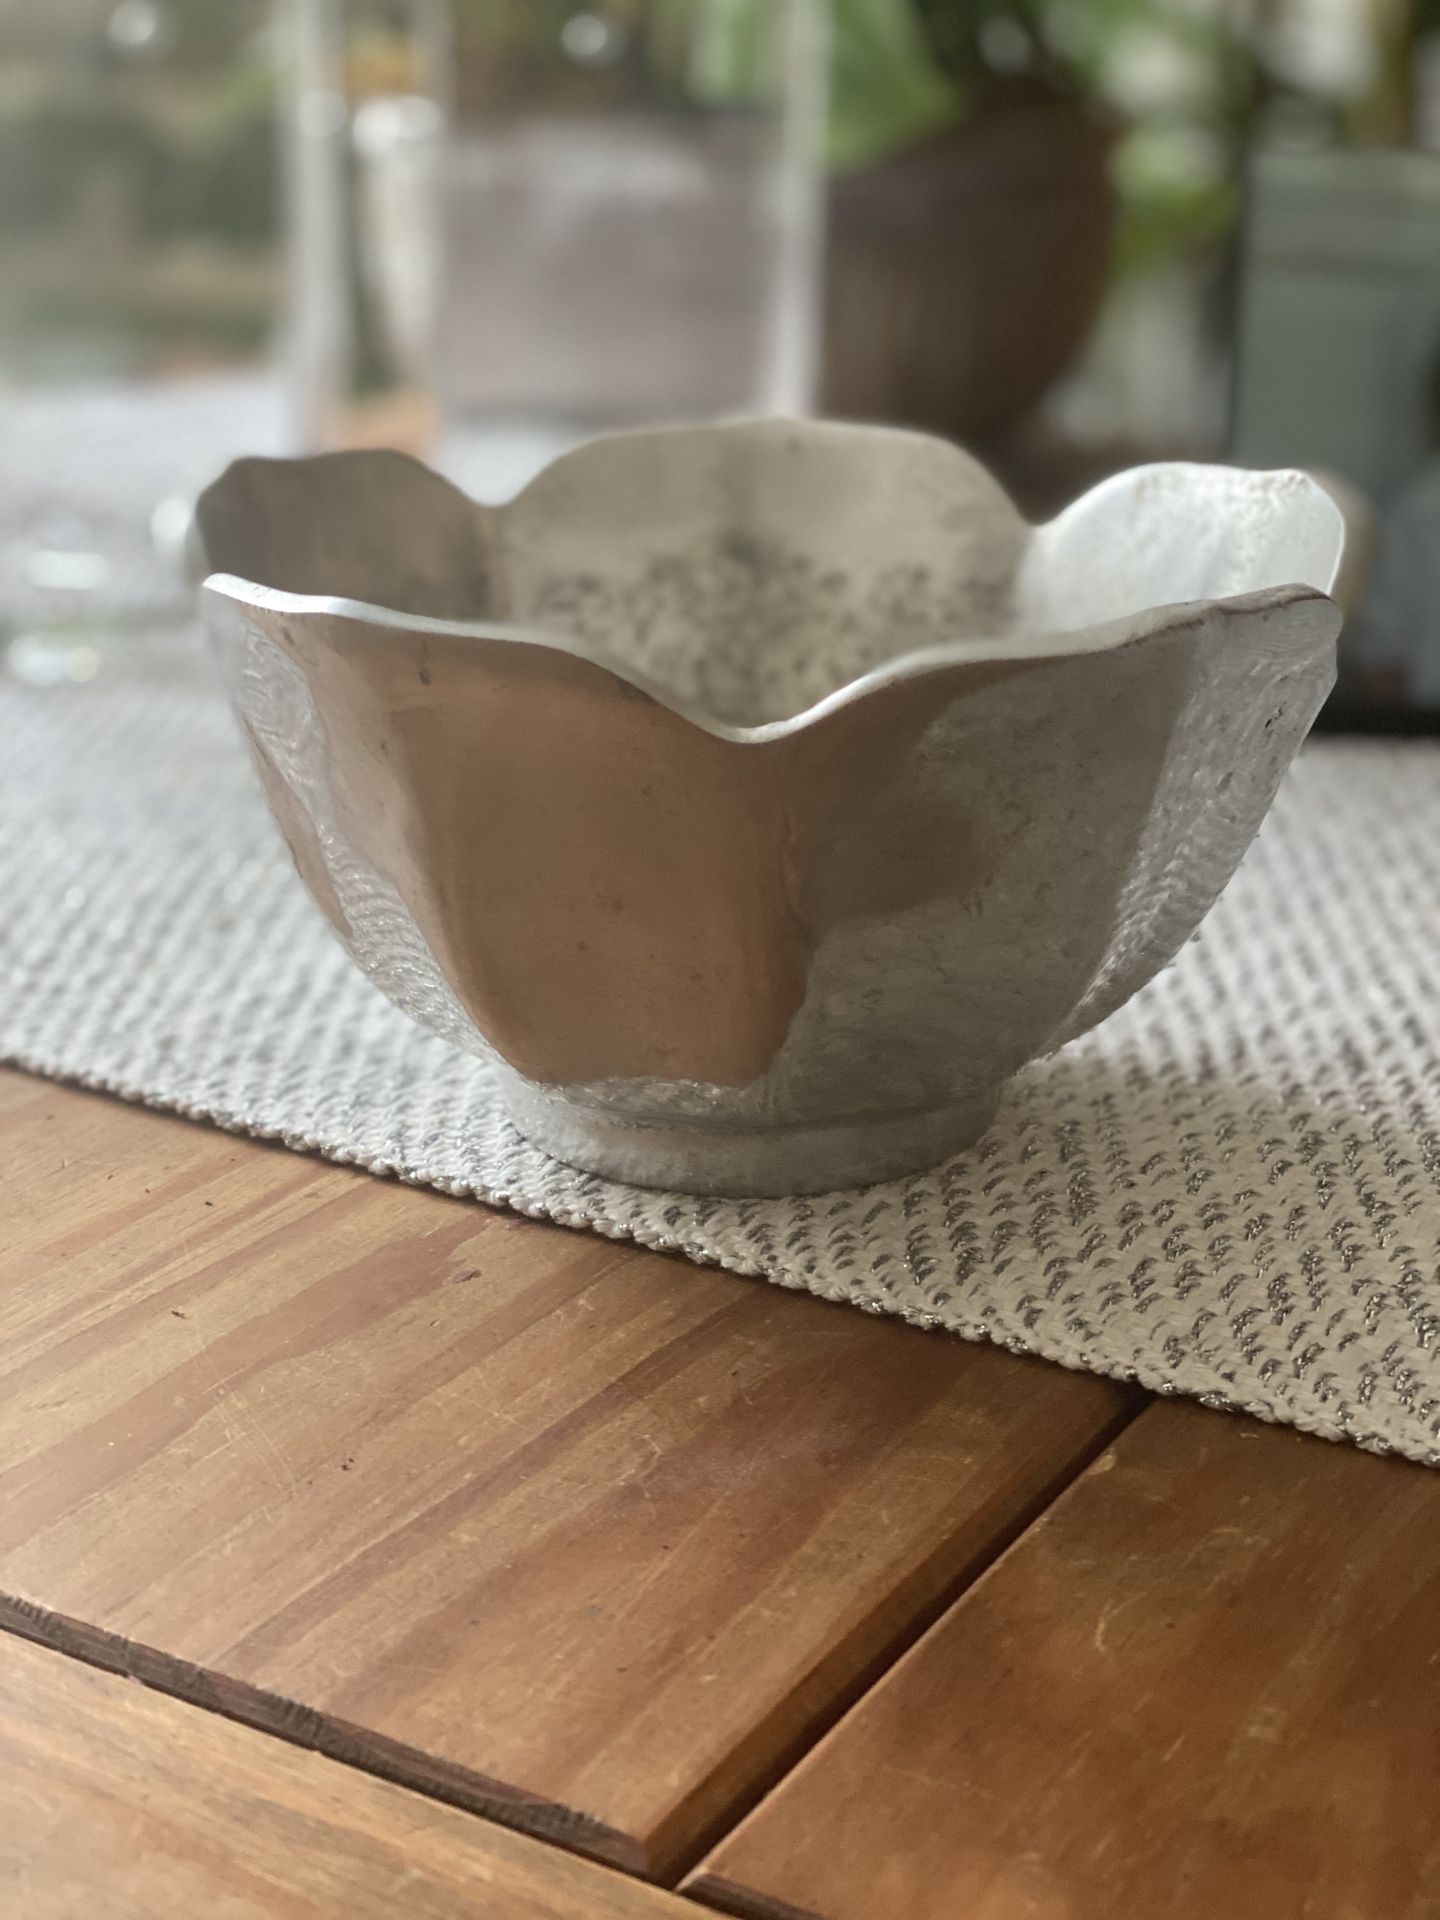 7” pewter like bowl with good weight